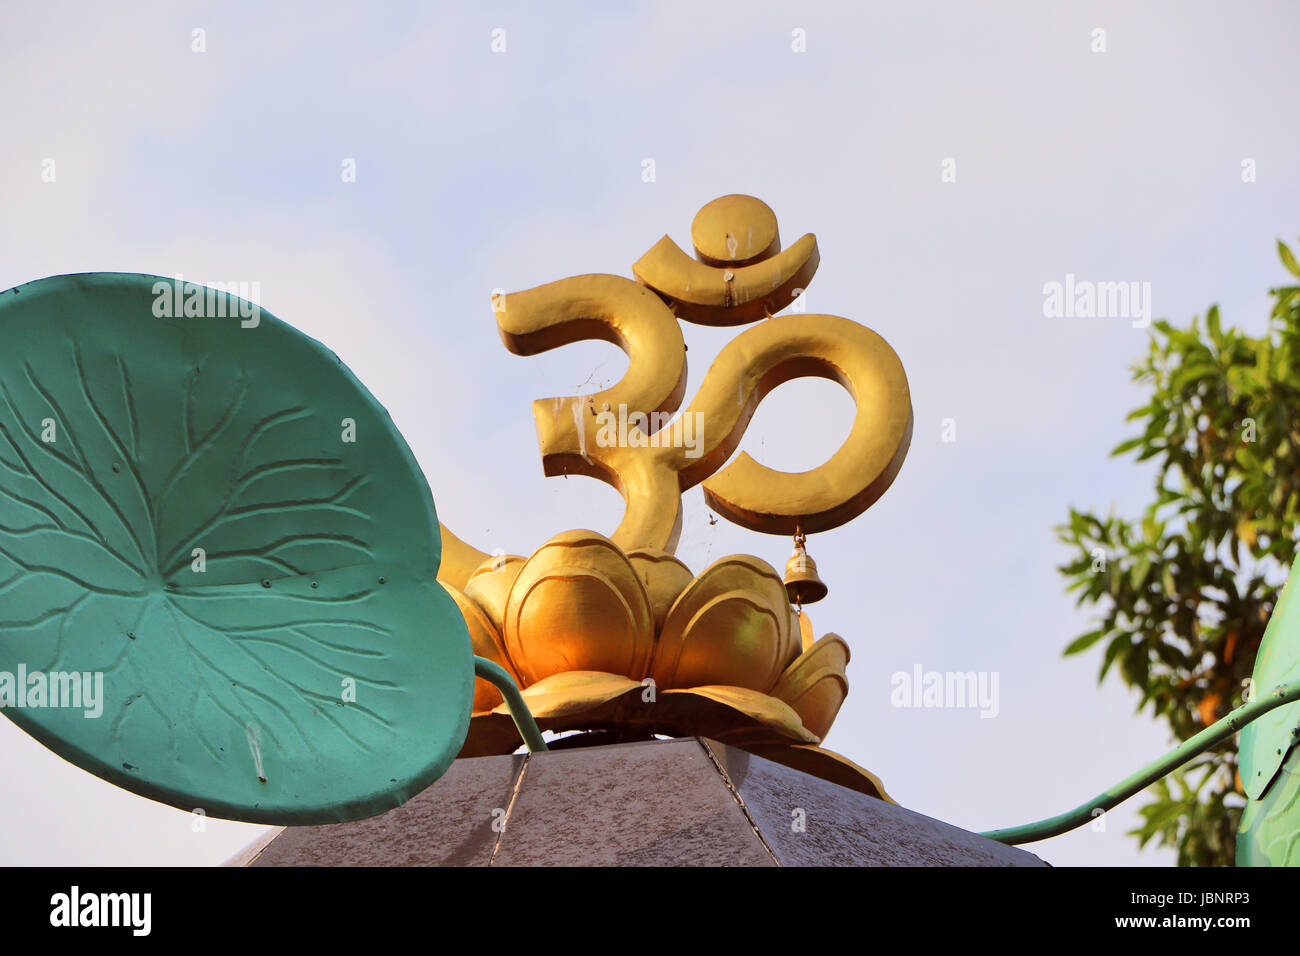 Devine ohm symbol in the open sky; according to Hindu myths, symbol represents the universal supreme powers. Stock Photo